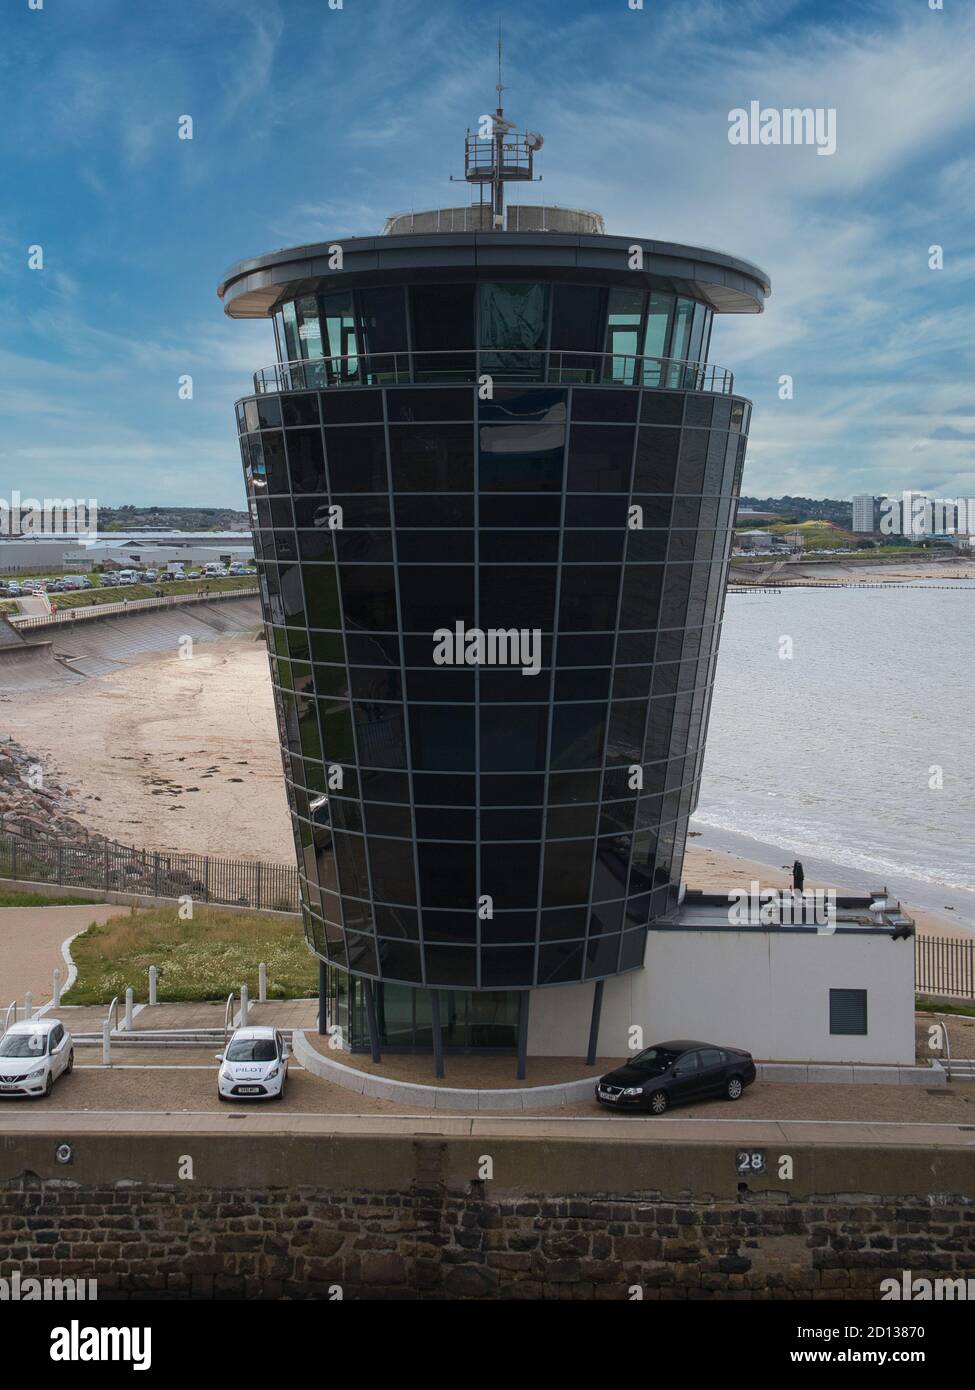 Designed by SMC Parr Architects, the glass clad building of the Marine Operations Centre of the Port of Aberdeen in Scotland, UK. Stock Photo